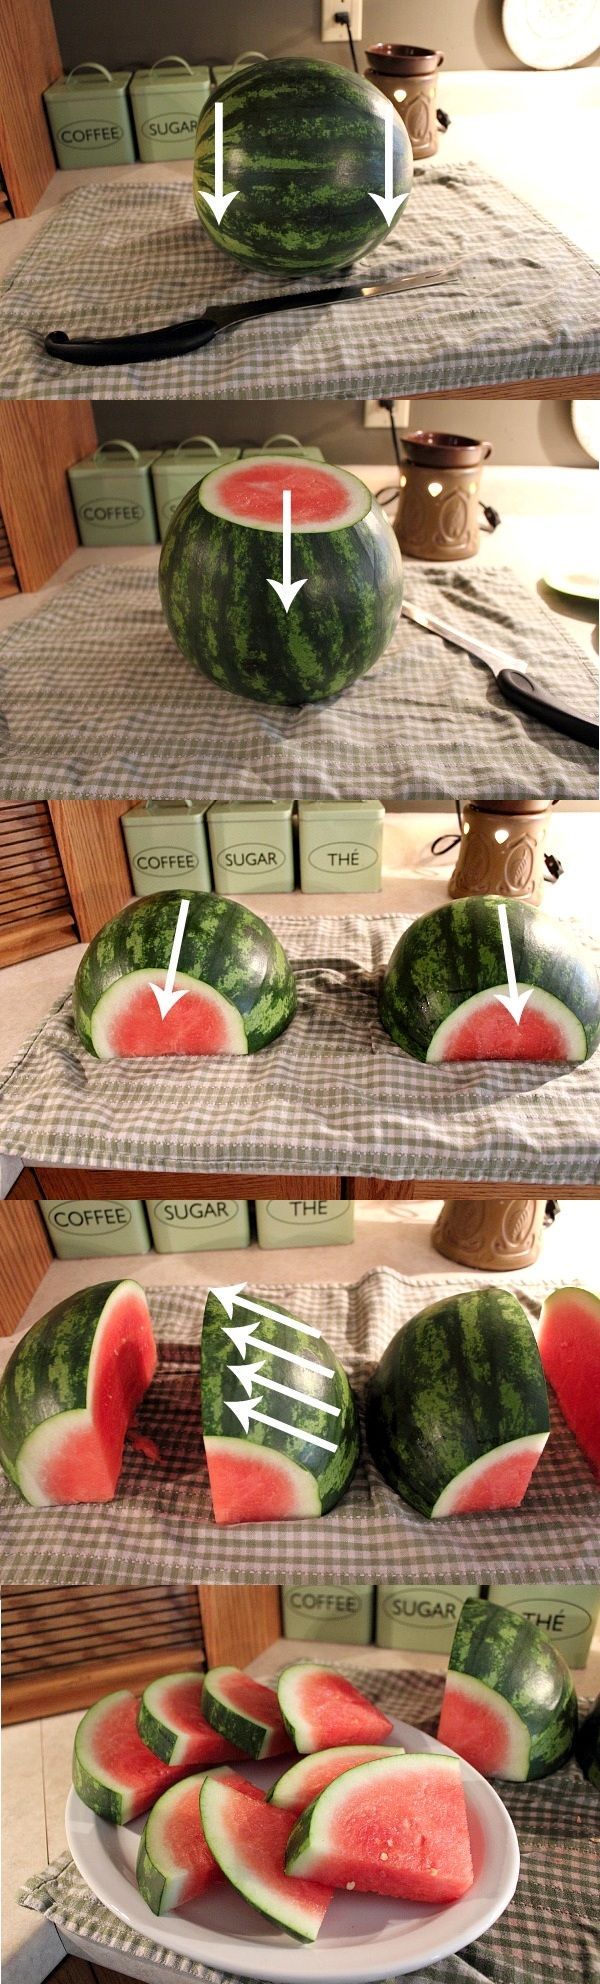 The easy way to cut a watermelon